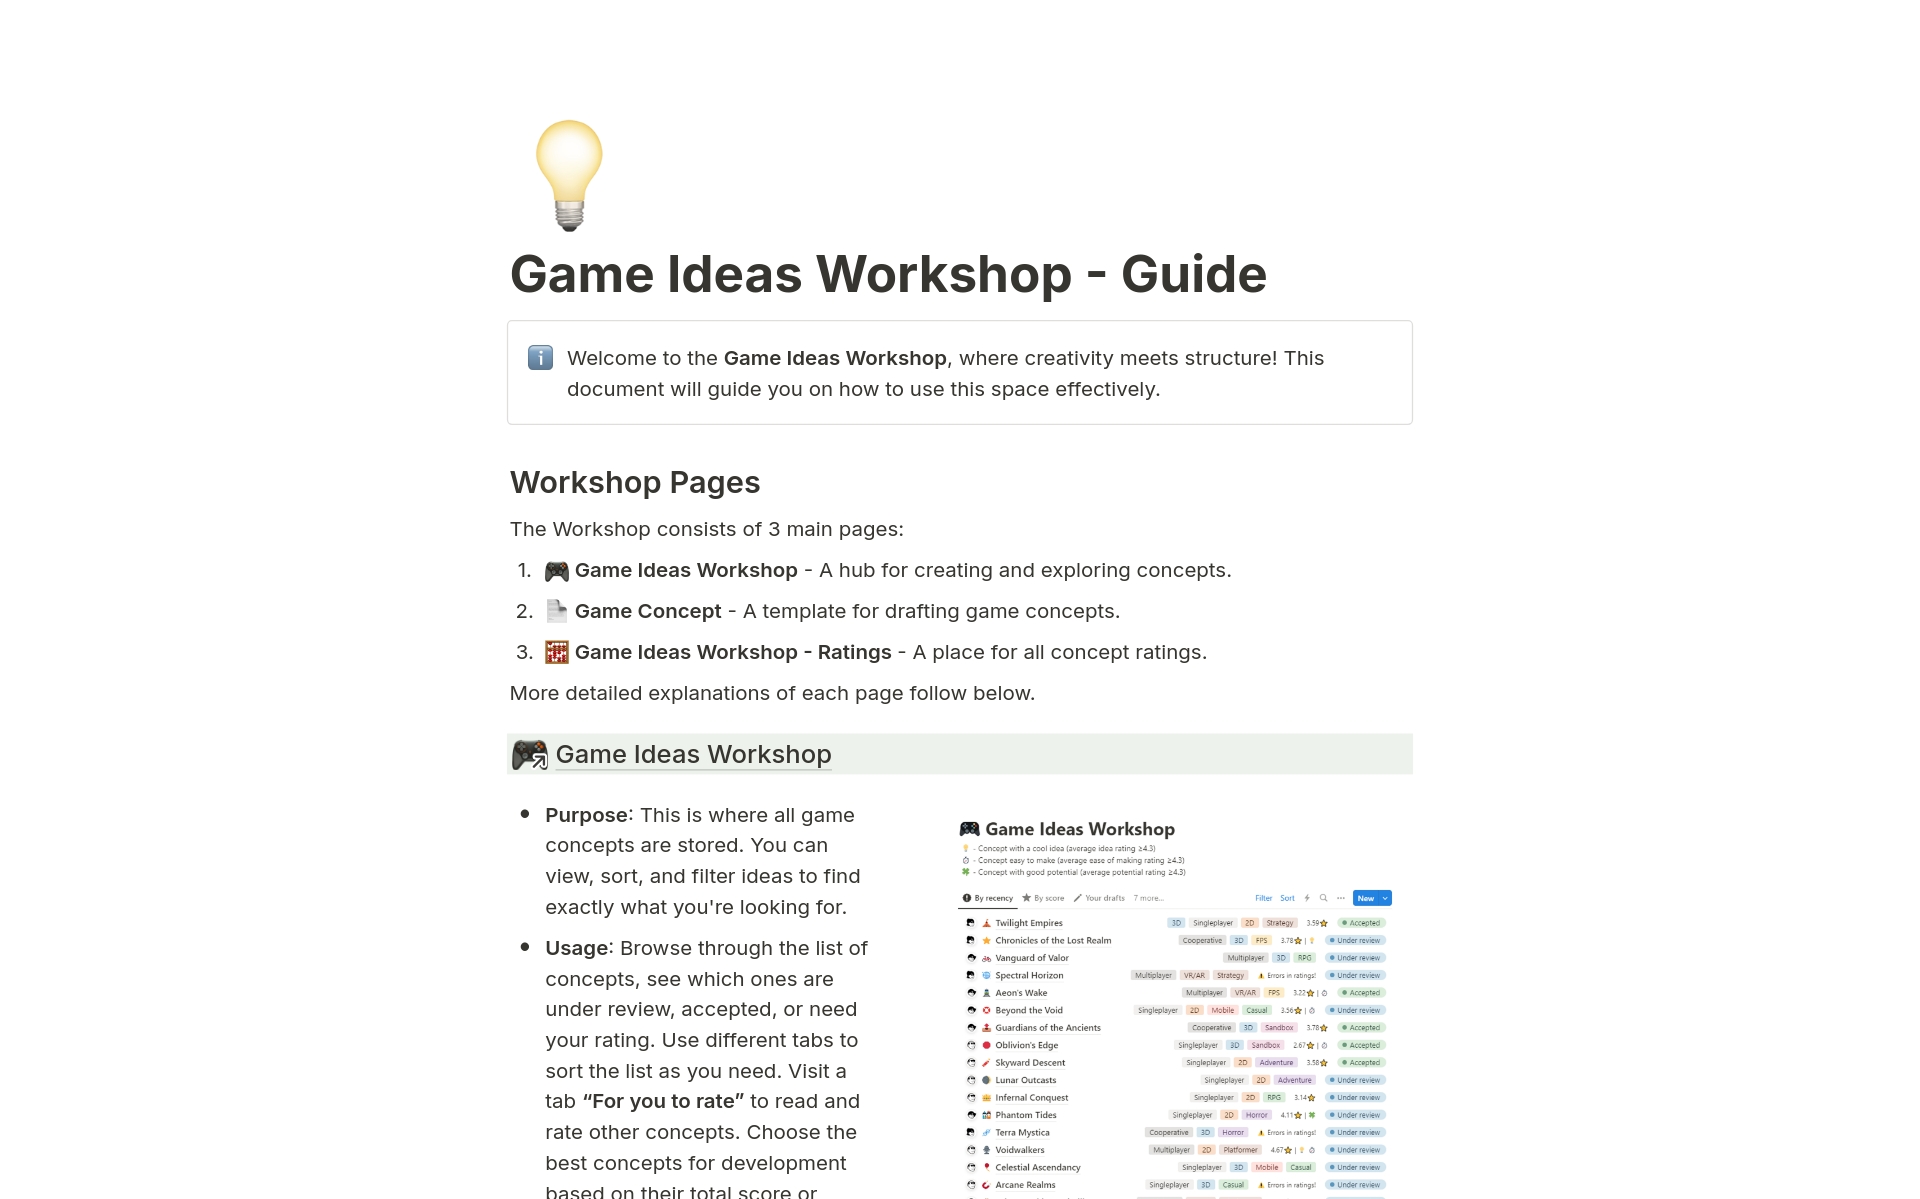 An efficient collaborative platform offering tools for drafting, reviewing, and rating game concepts. Perfect for generating the next big hit through structured brainstorming and teamwork.